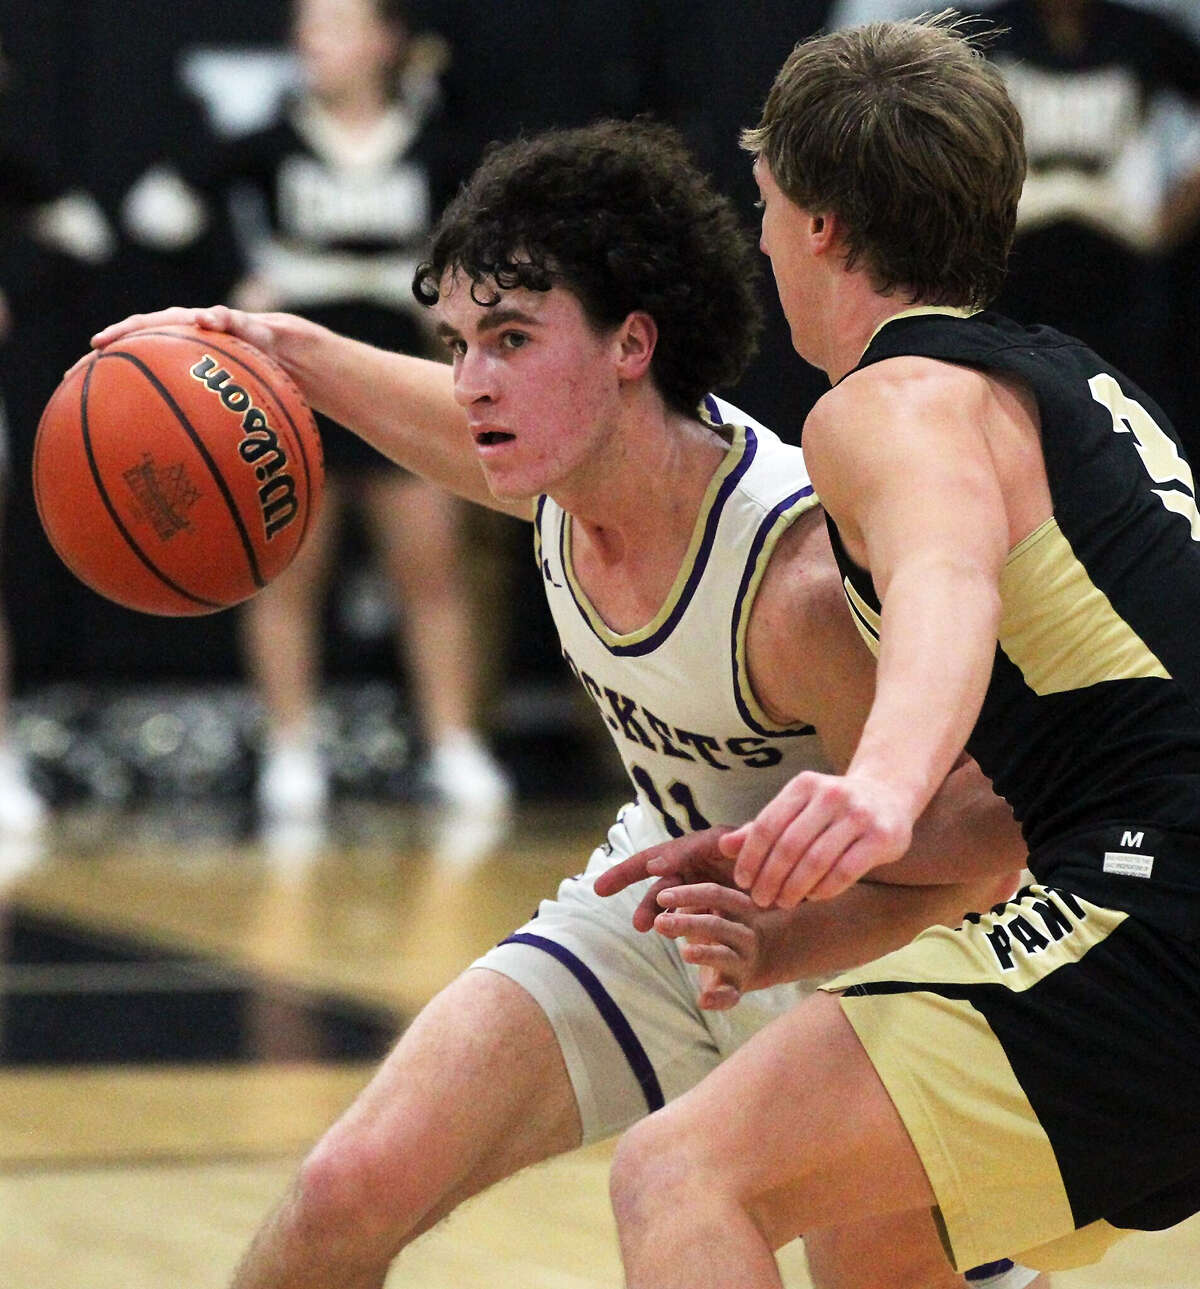 Jacksonville Routt's Nolan Turner dribbles against Camp Point Central in the semifinals of the 100th Winchester Invitational Thursday night in Winchester.